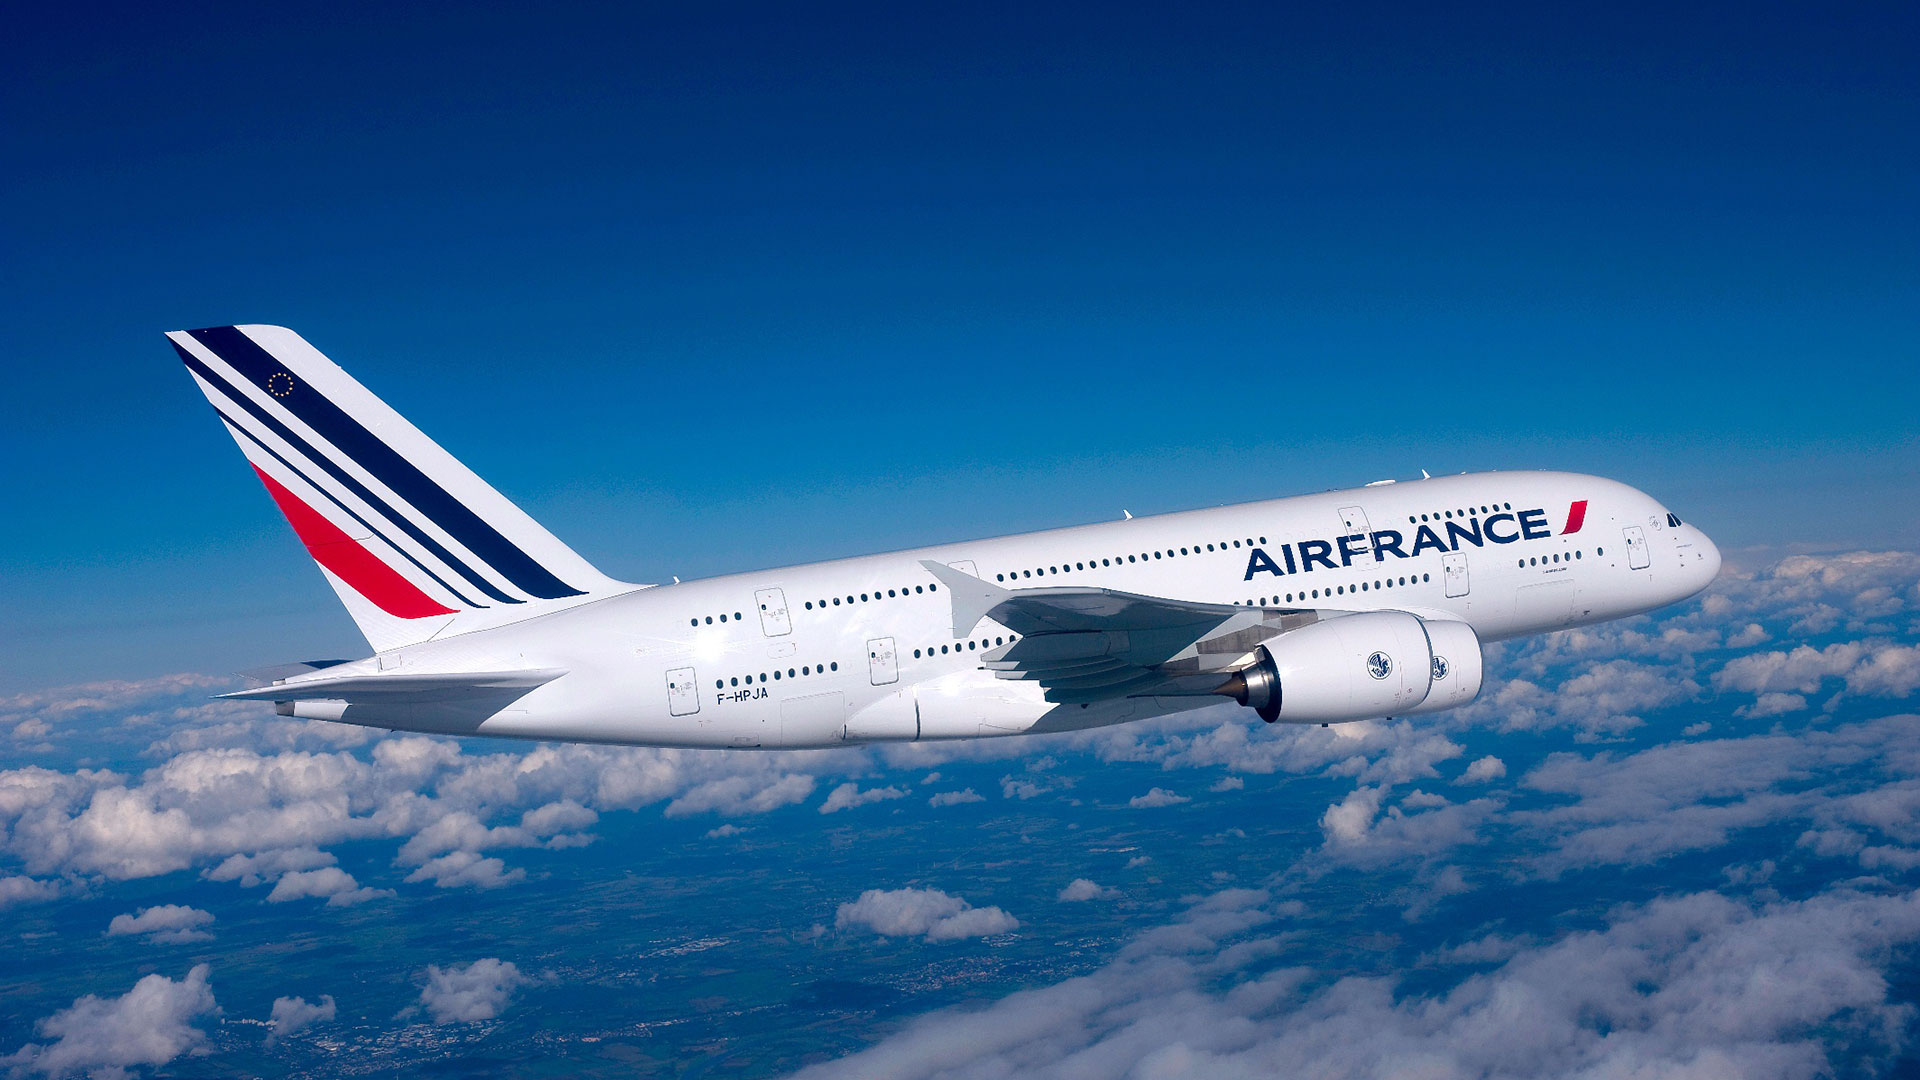 Air France's La Premiere Two VIP Services With Private Jet Connections